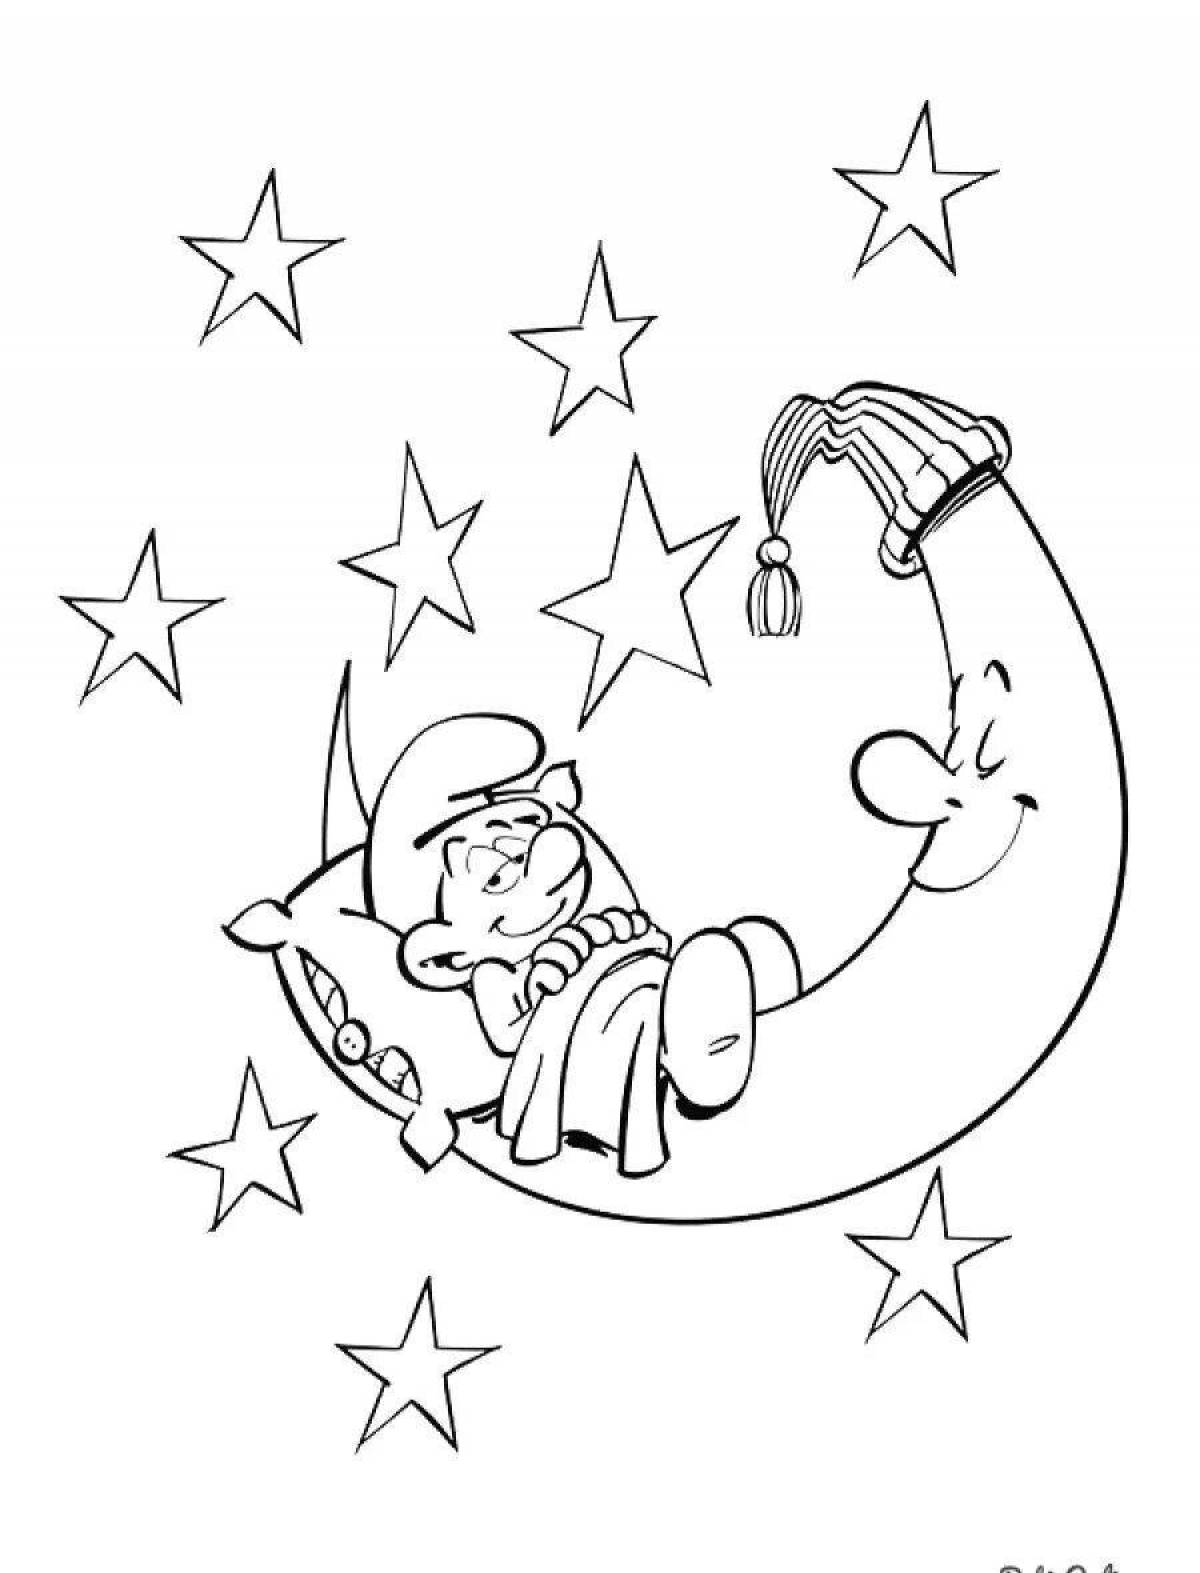 Coloring book shining bear on the moon